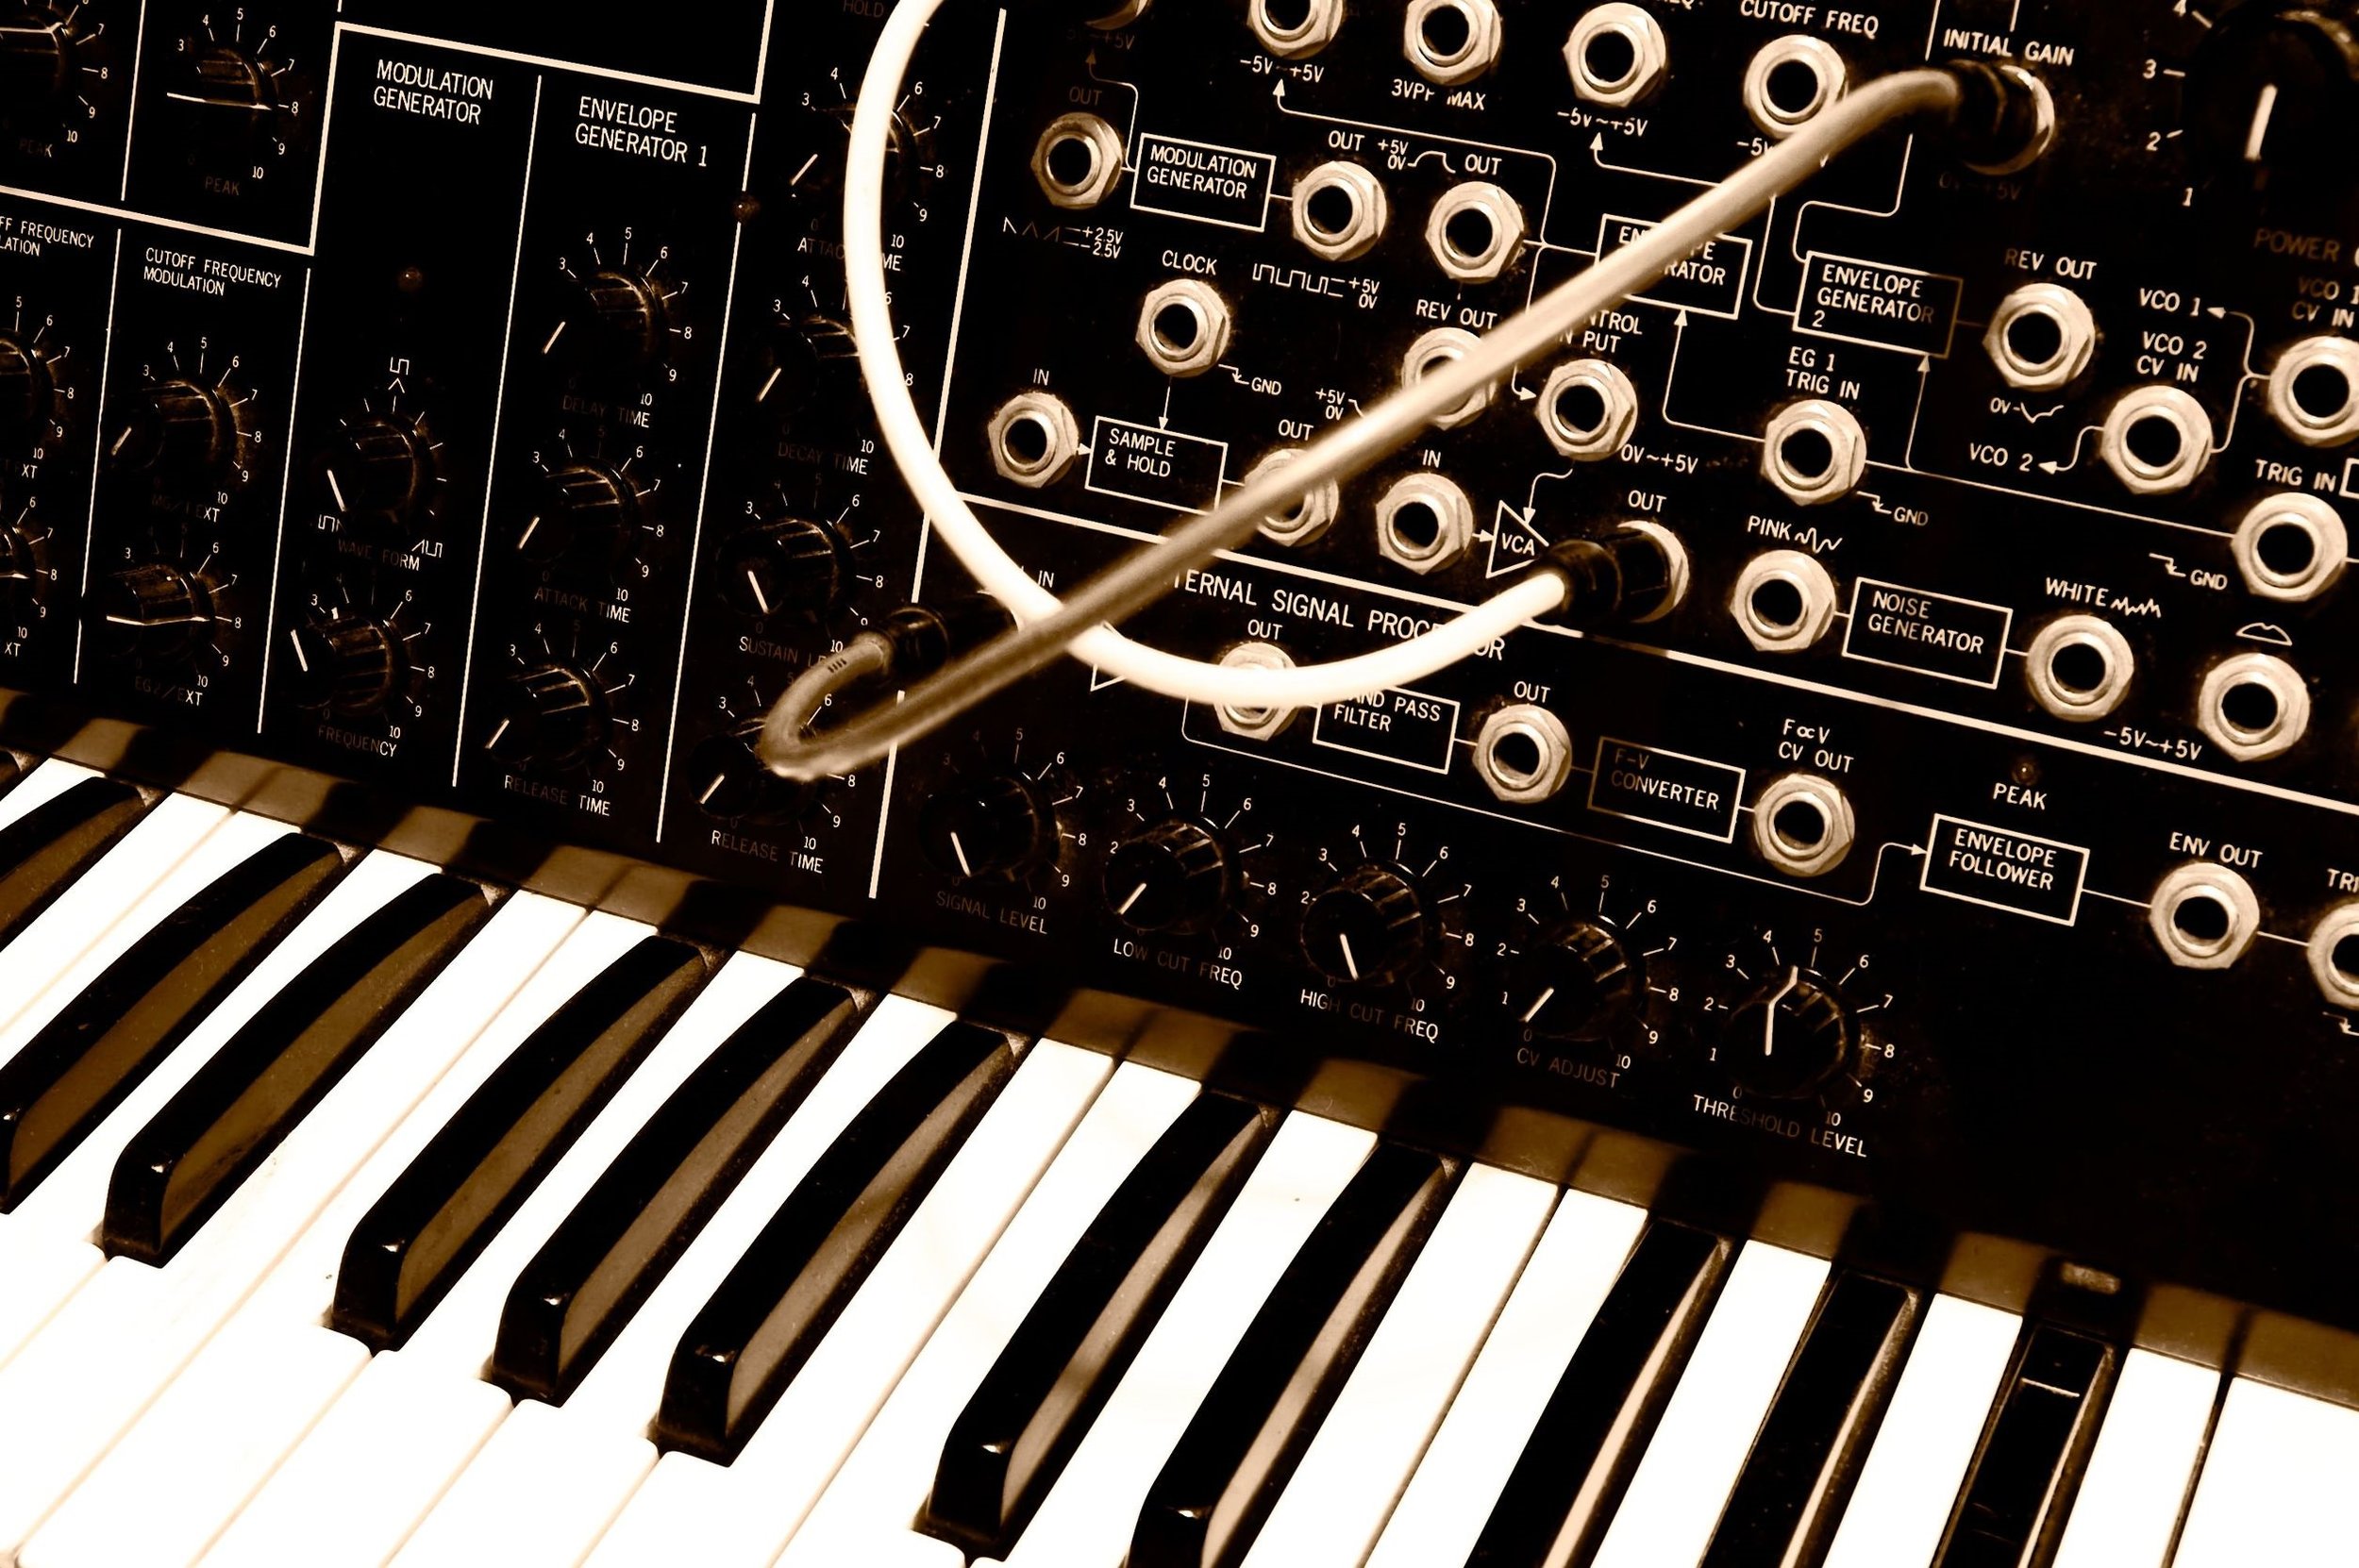 Most synths, like to Korg MS-20 above,&nbsp;use a piano-style keybed as an input mechanism. The Vindor ES1 uses the rising and falling of the player's breath to measure attack, decay, sustain, and release.